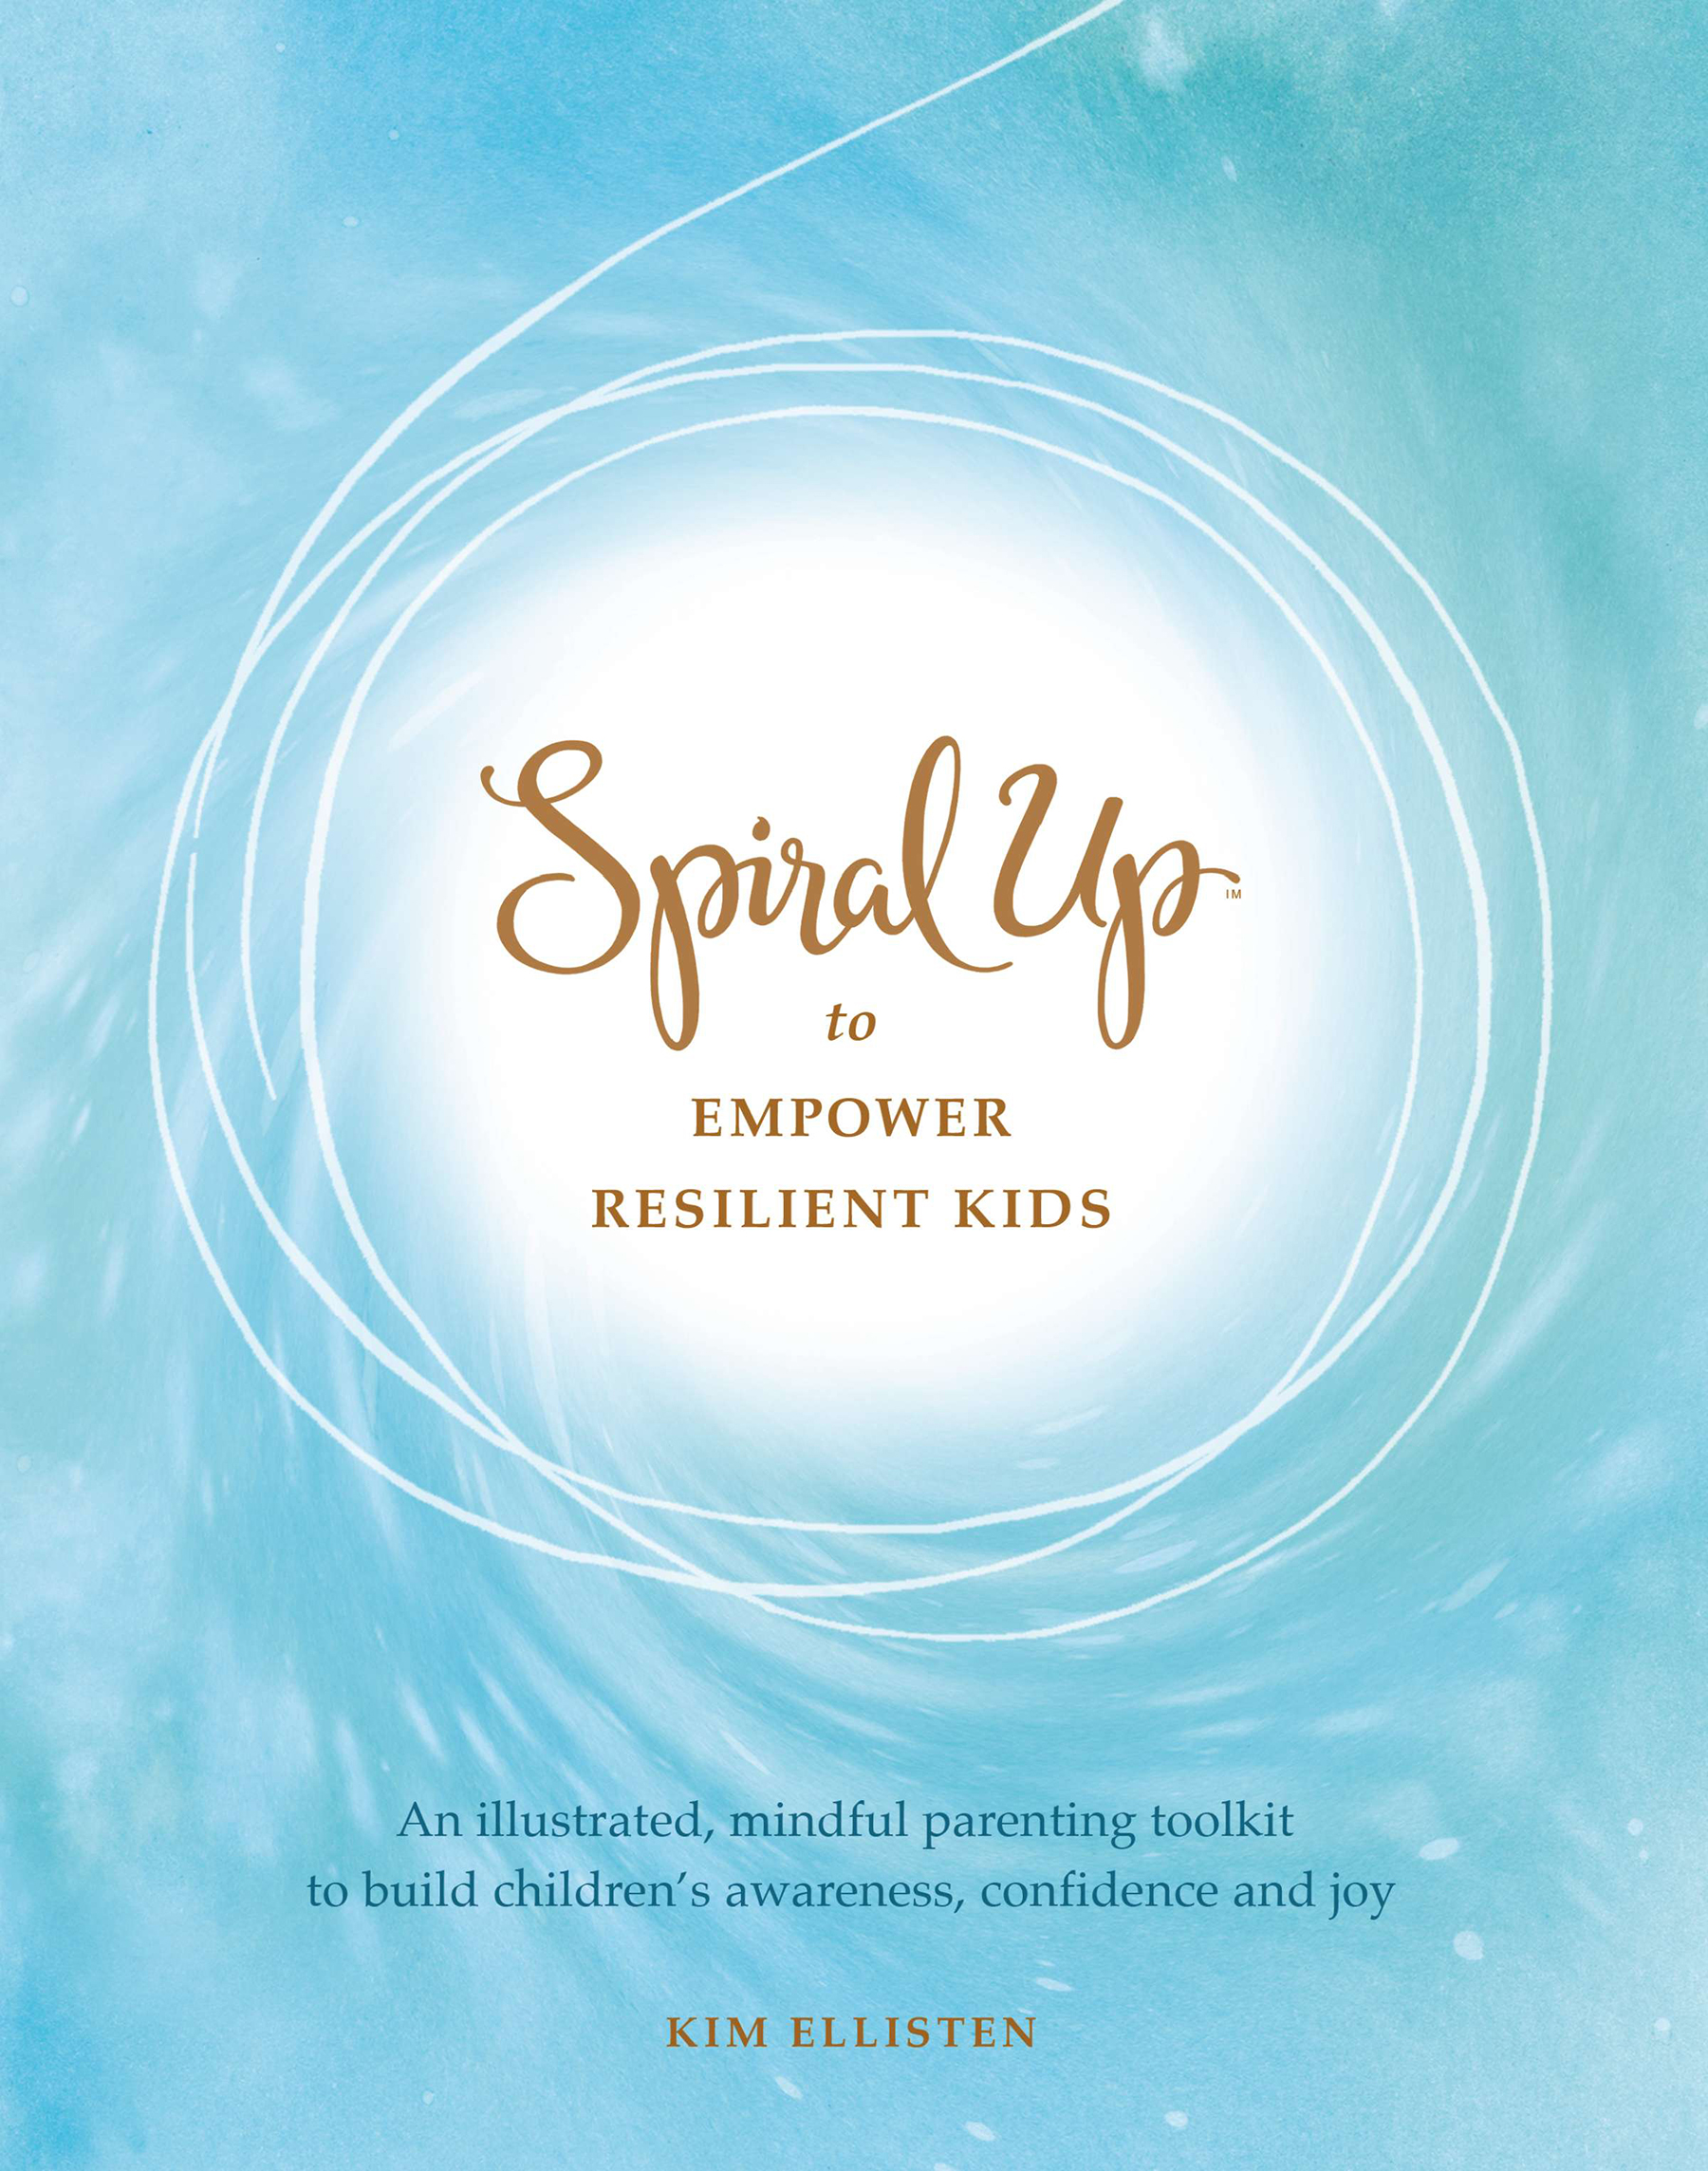 Spiral Up to Empower Resilient Kids: An illustrated, mindful parenting toolkit to build children’s awareness, confidence and joy